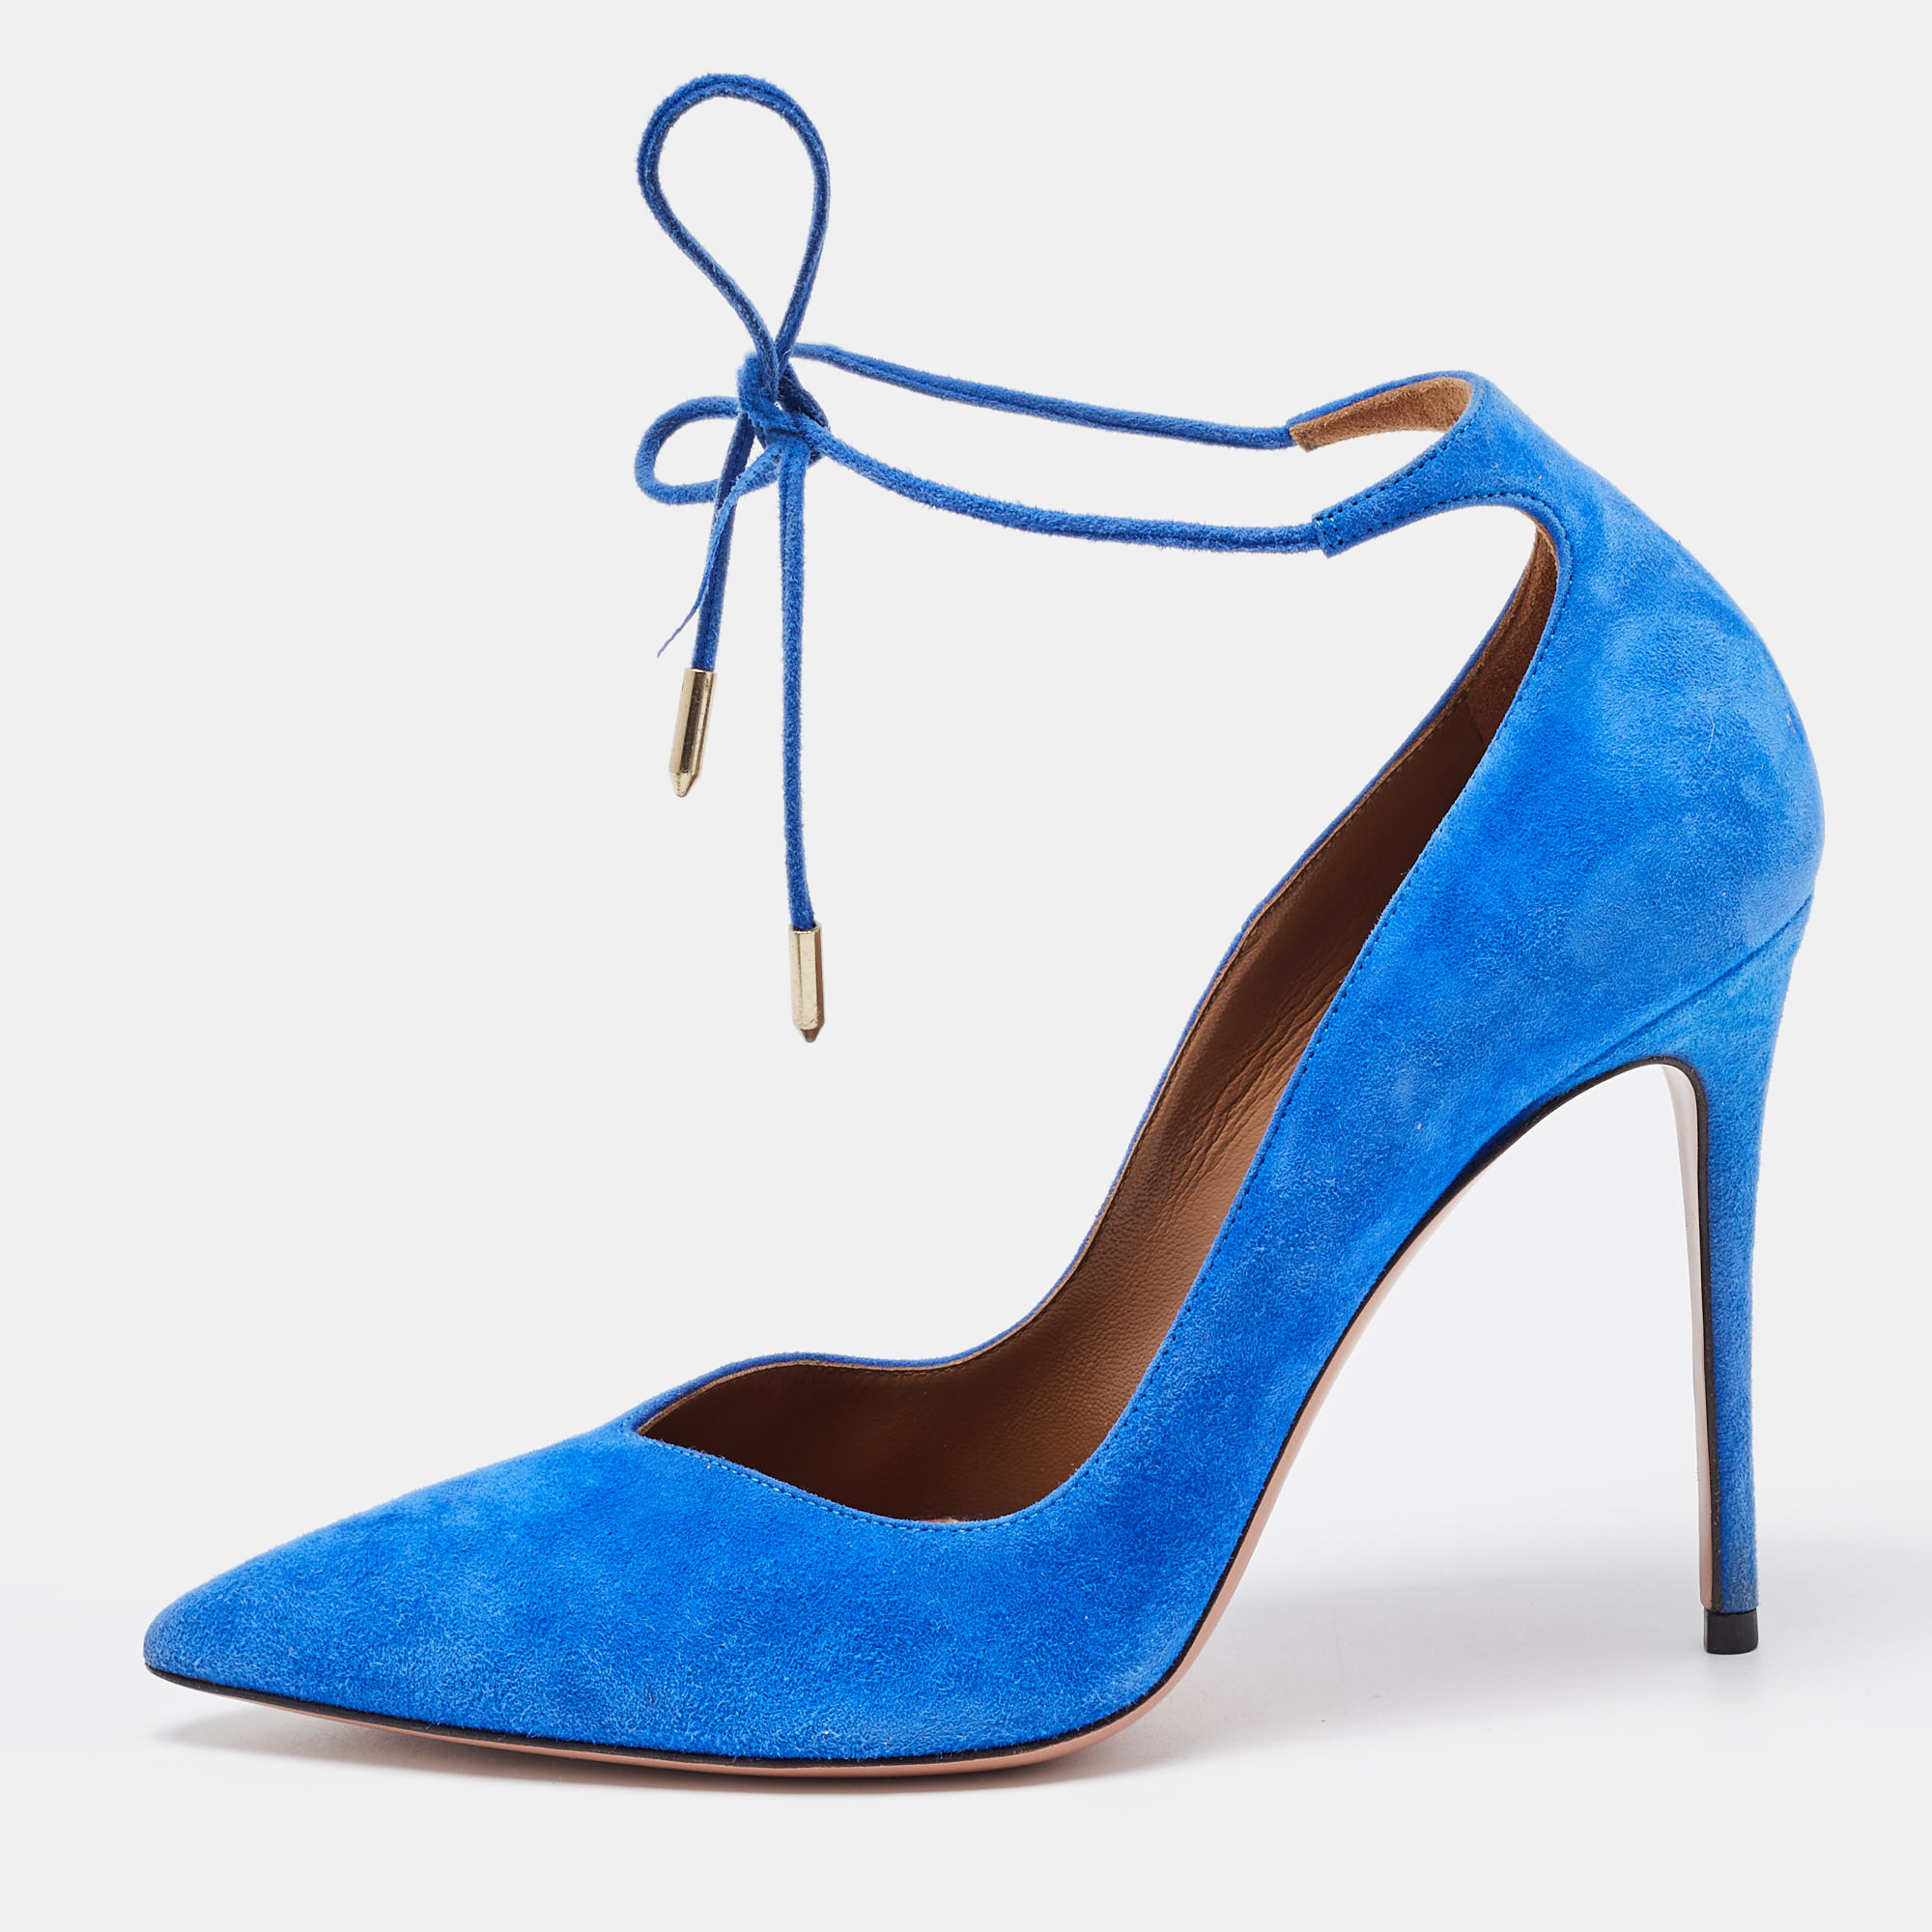 Pre-owned Aquazzura Blue Suede Pointed Toe Ankle Wrap Pumps Size 37.5